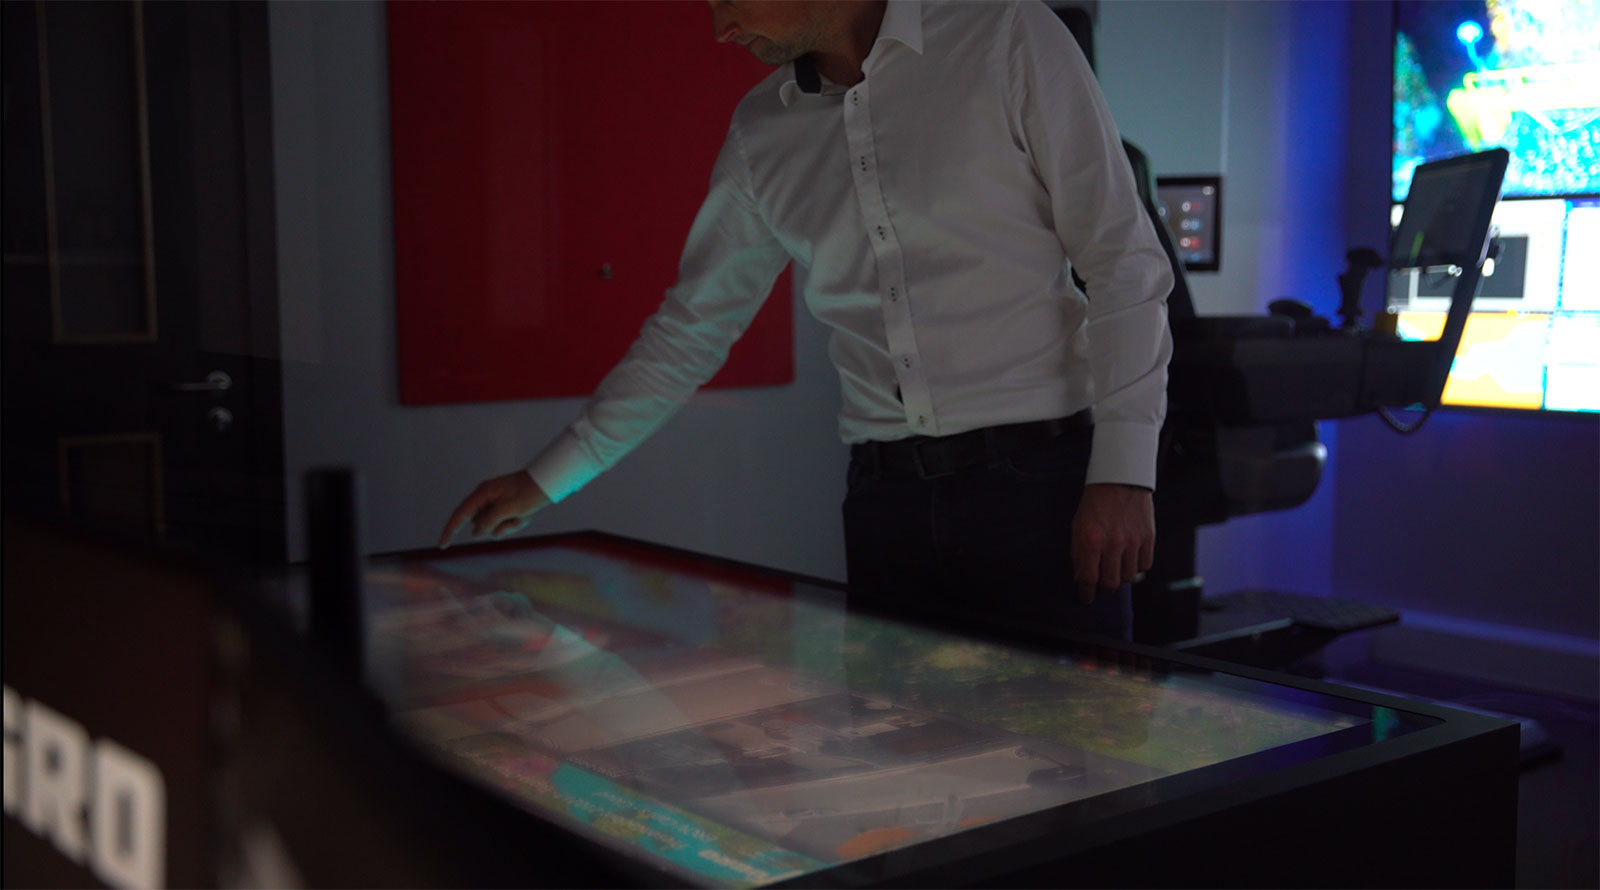 2 uncrewed surface vessel passage planning being conducted on fugros digital touch table within our aberdeen roc